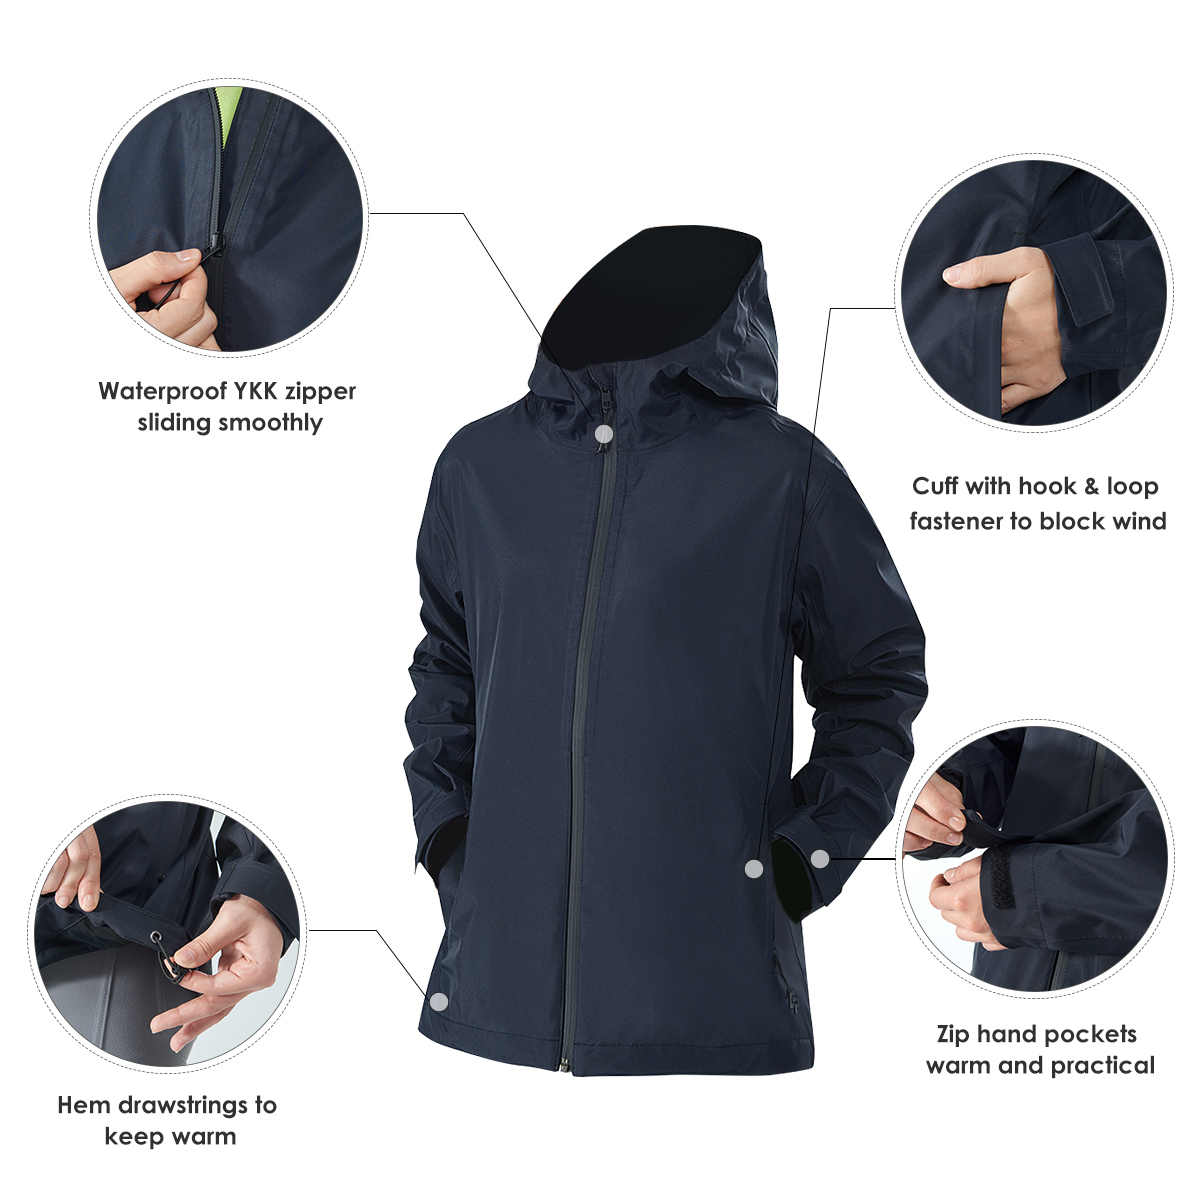 Gymax Women' Waterproof Jacket Hooded Coat w/Cuff Camping Navy Size L - image 6 of 10